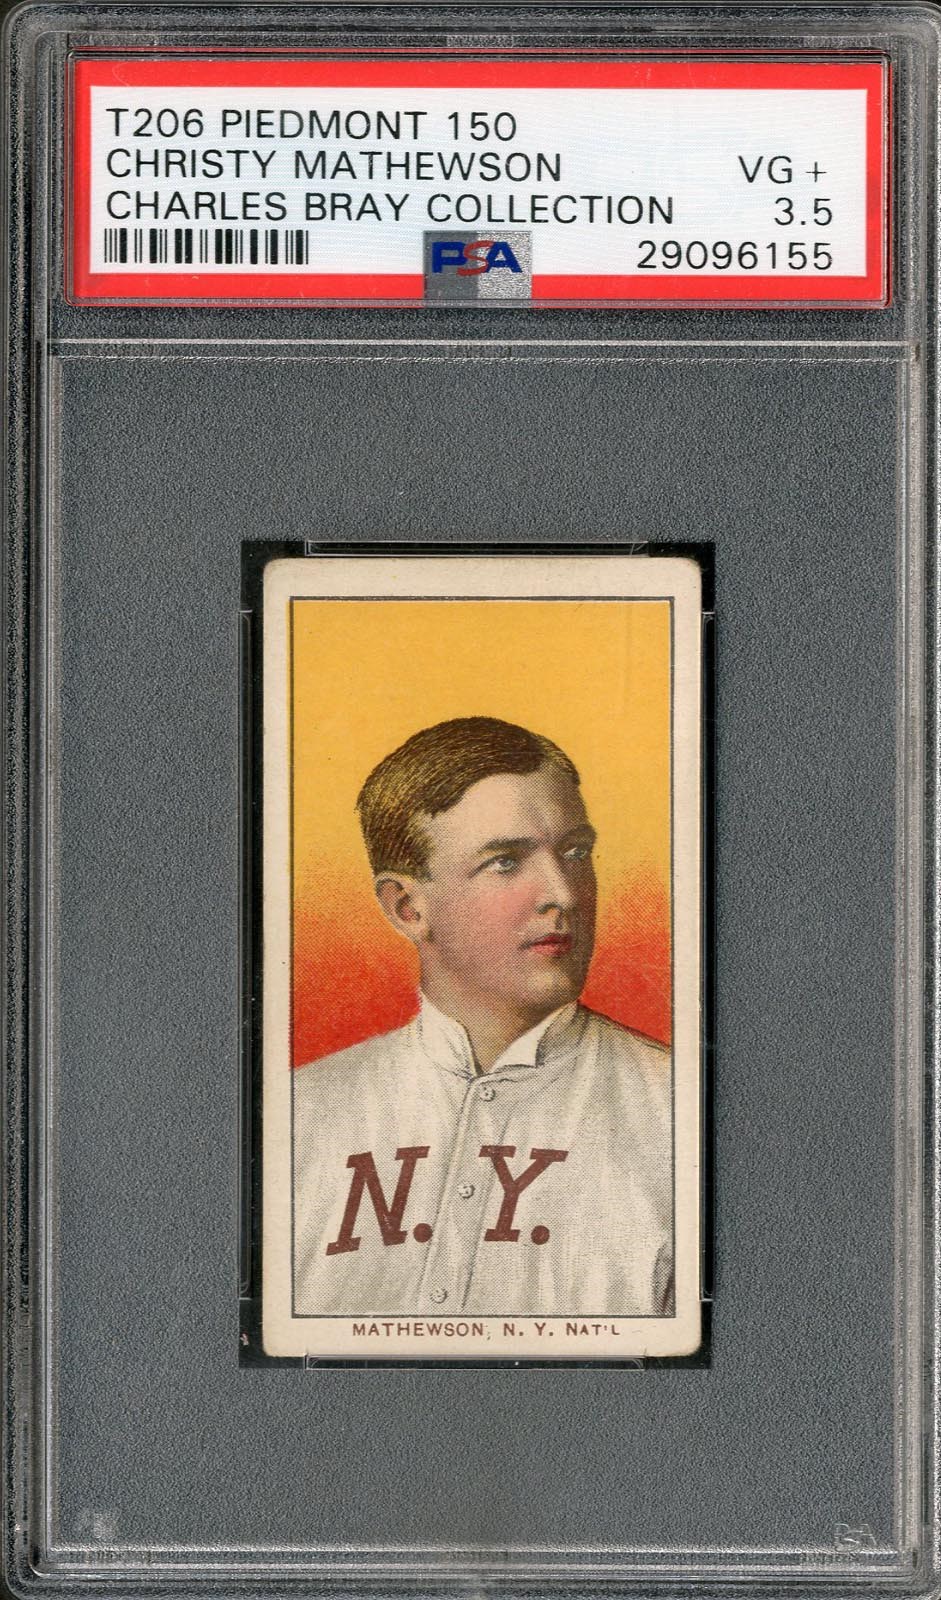 - T206 Piedmont 150 Christy Mathewson Portrait PSA 3.5 From The Charles Bray Collection